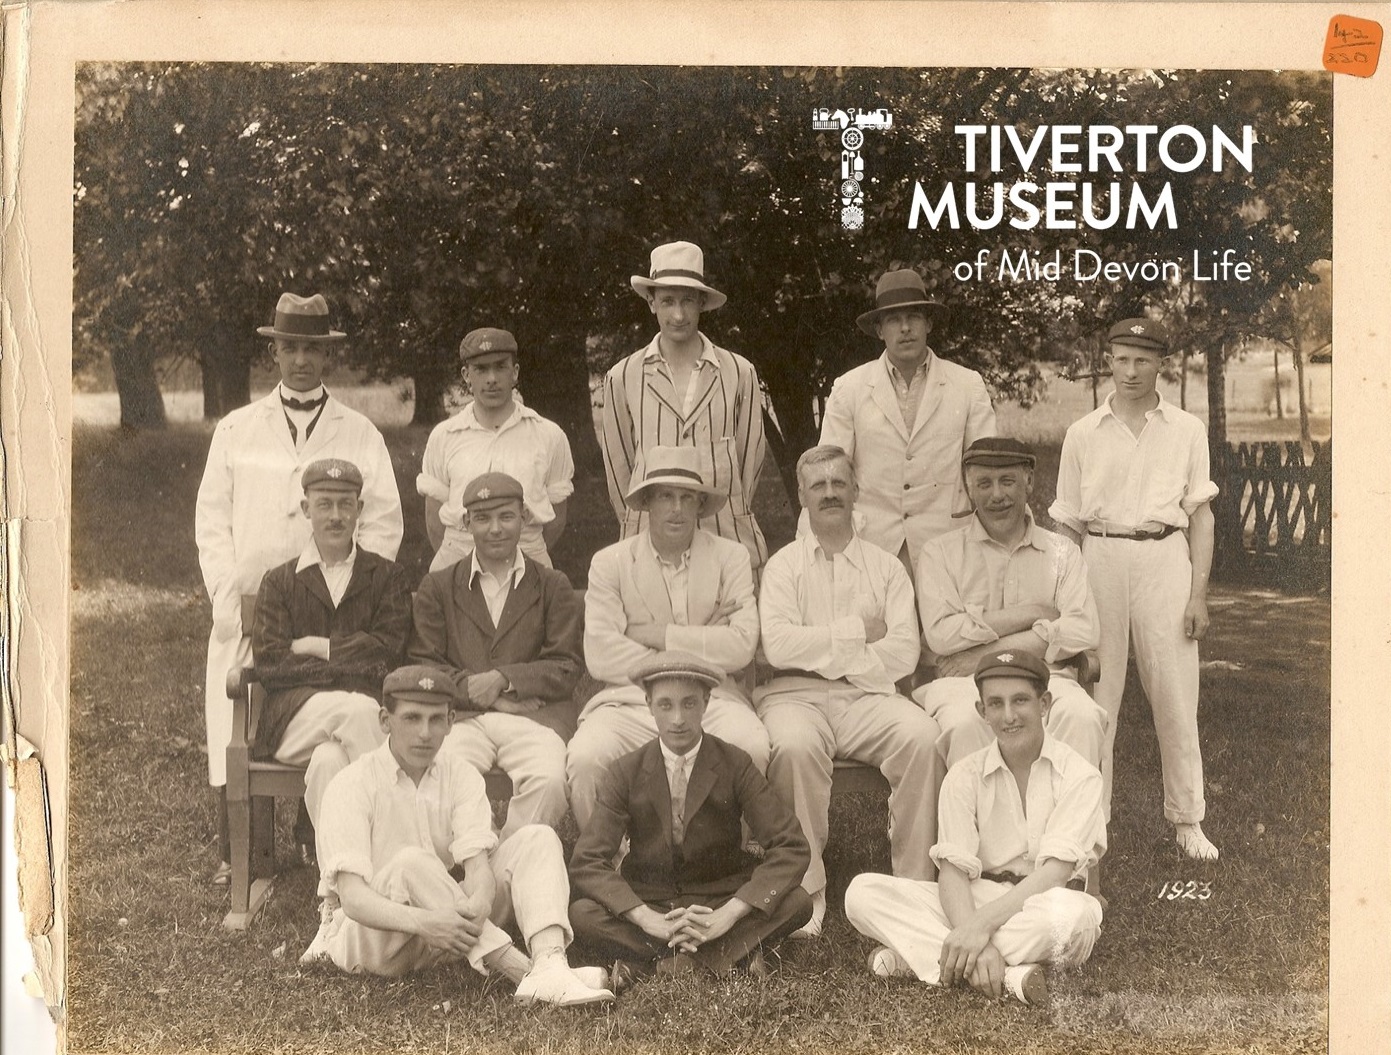 13 men seated in rows wearing old fashioned cricket kit and hats